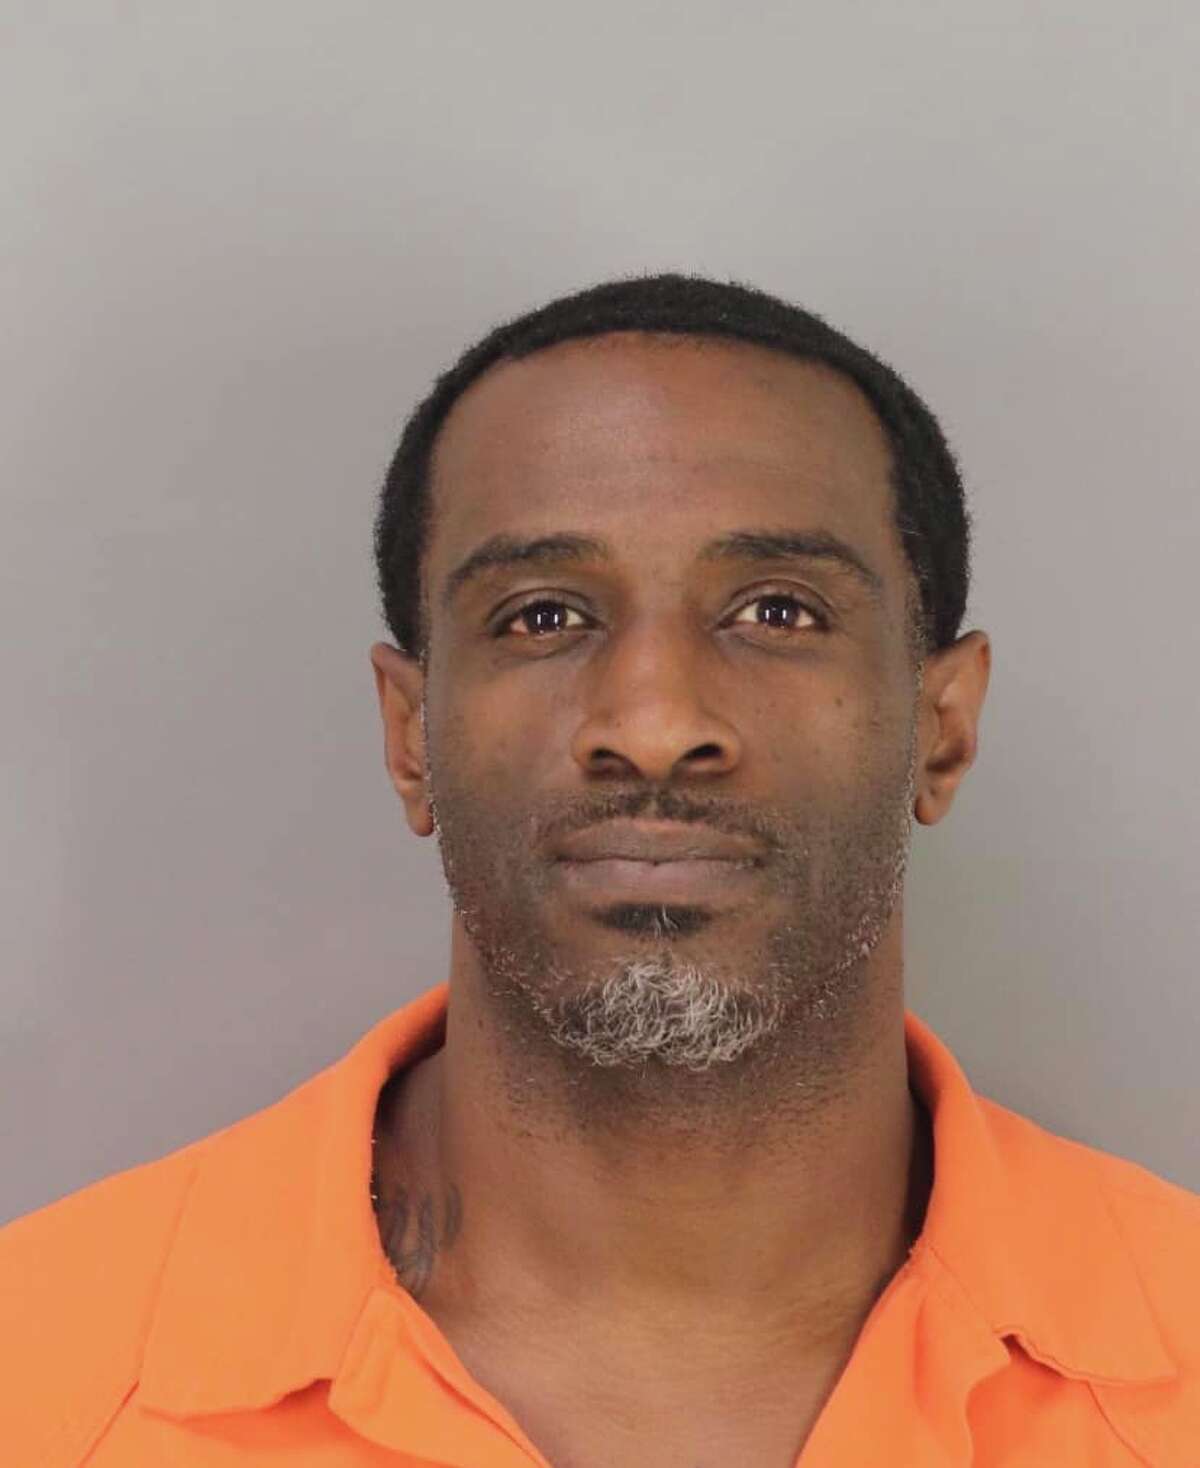 Beaumont Police said investigators are looking for a person of interest. Detectives need to speak with Channin Keon Ardoin, a 39-year-old Beaumont man. Investigators believe Ardoin has information about a structure fire that occurred Friday, October 7, 2022.